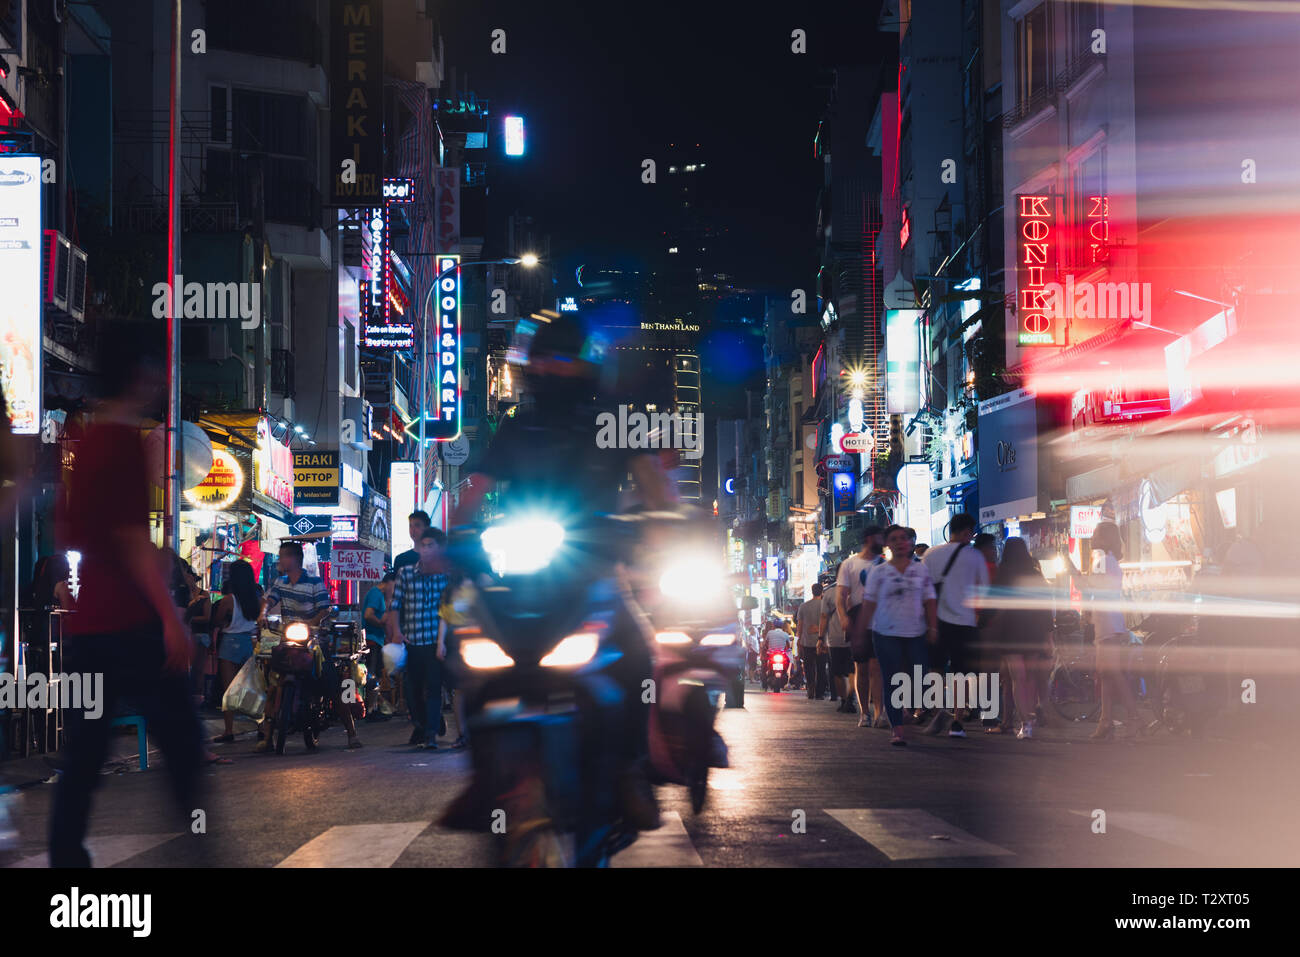 Ho Chi Minh City, Vietnam - April 26, 2018: lights of night Bui Vien Street with its neon sign boards, headlights of motorcycles and a walking crowd. Stock Photo